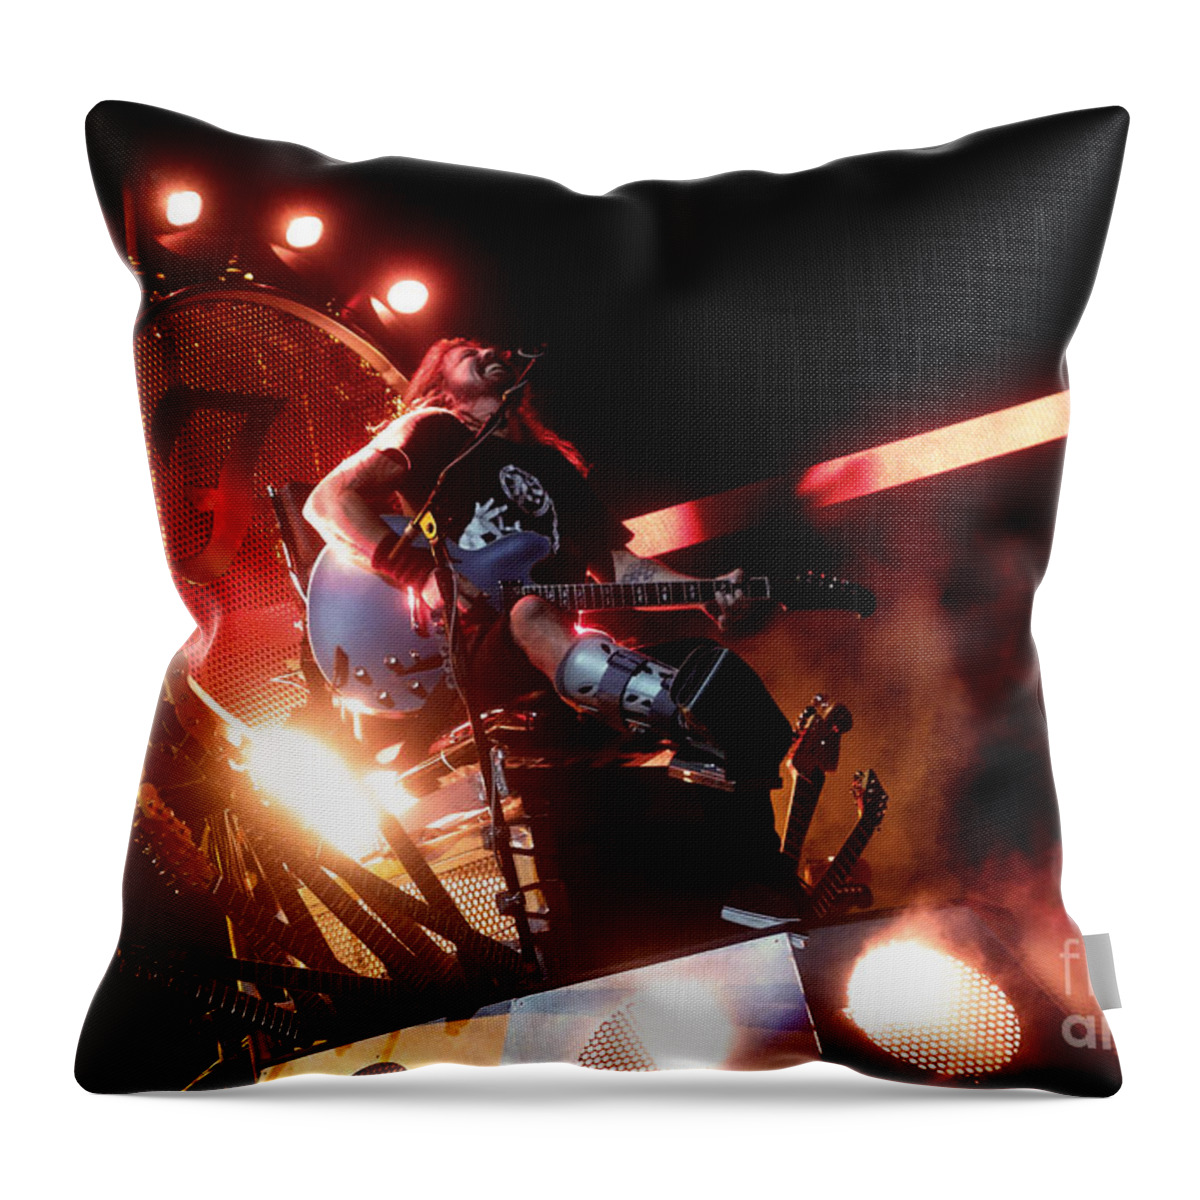 Davegrohl Throw Pillow featuring the photograph Dave Grohl - Foo Fighters #1 by Jennifer Camp